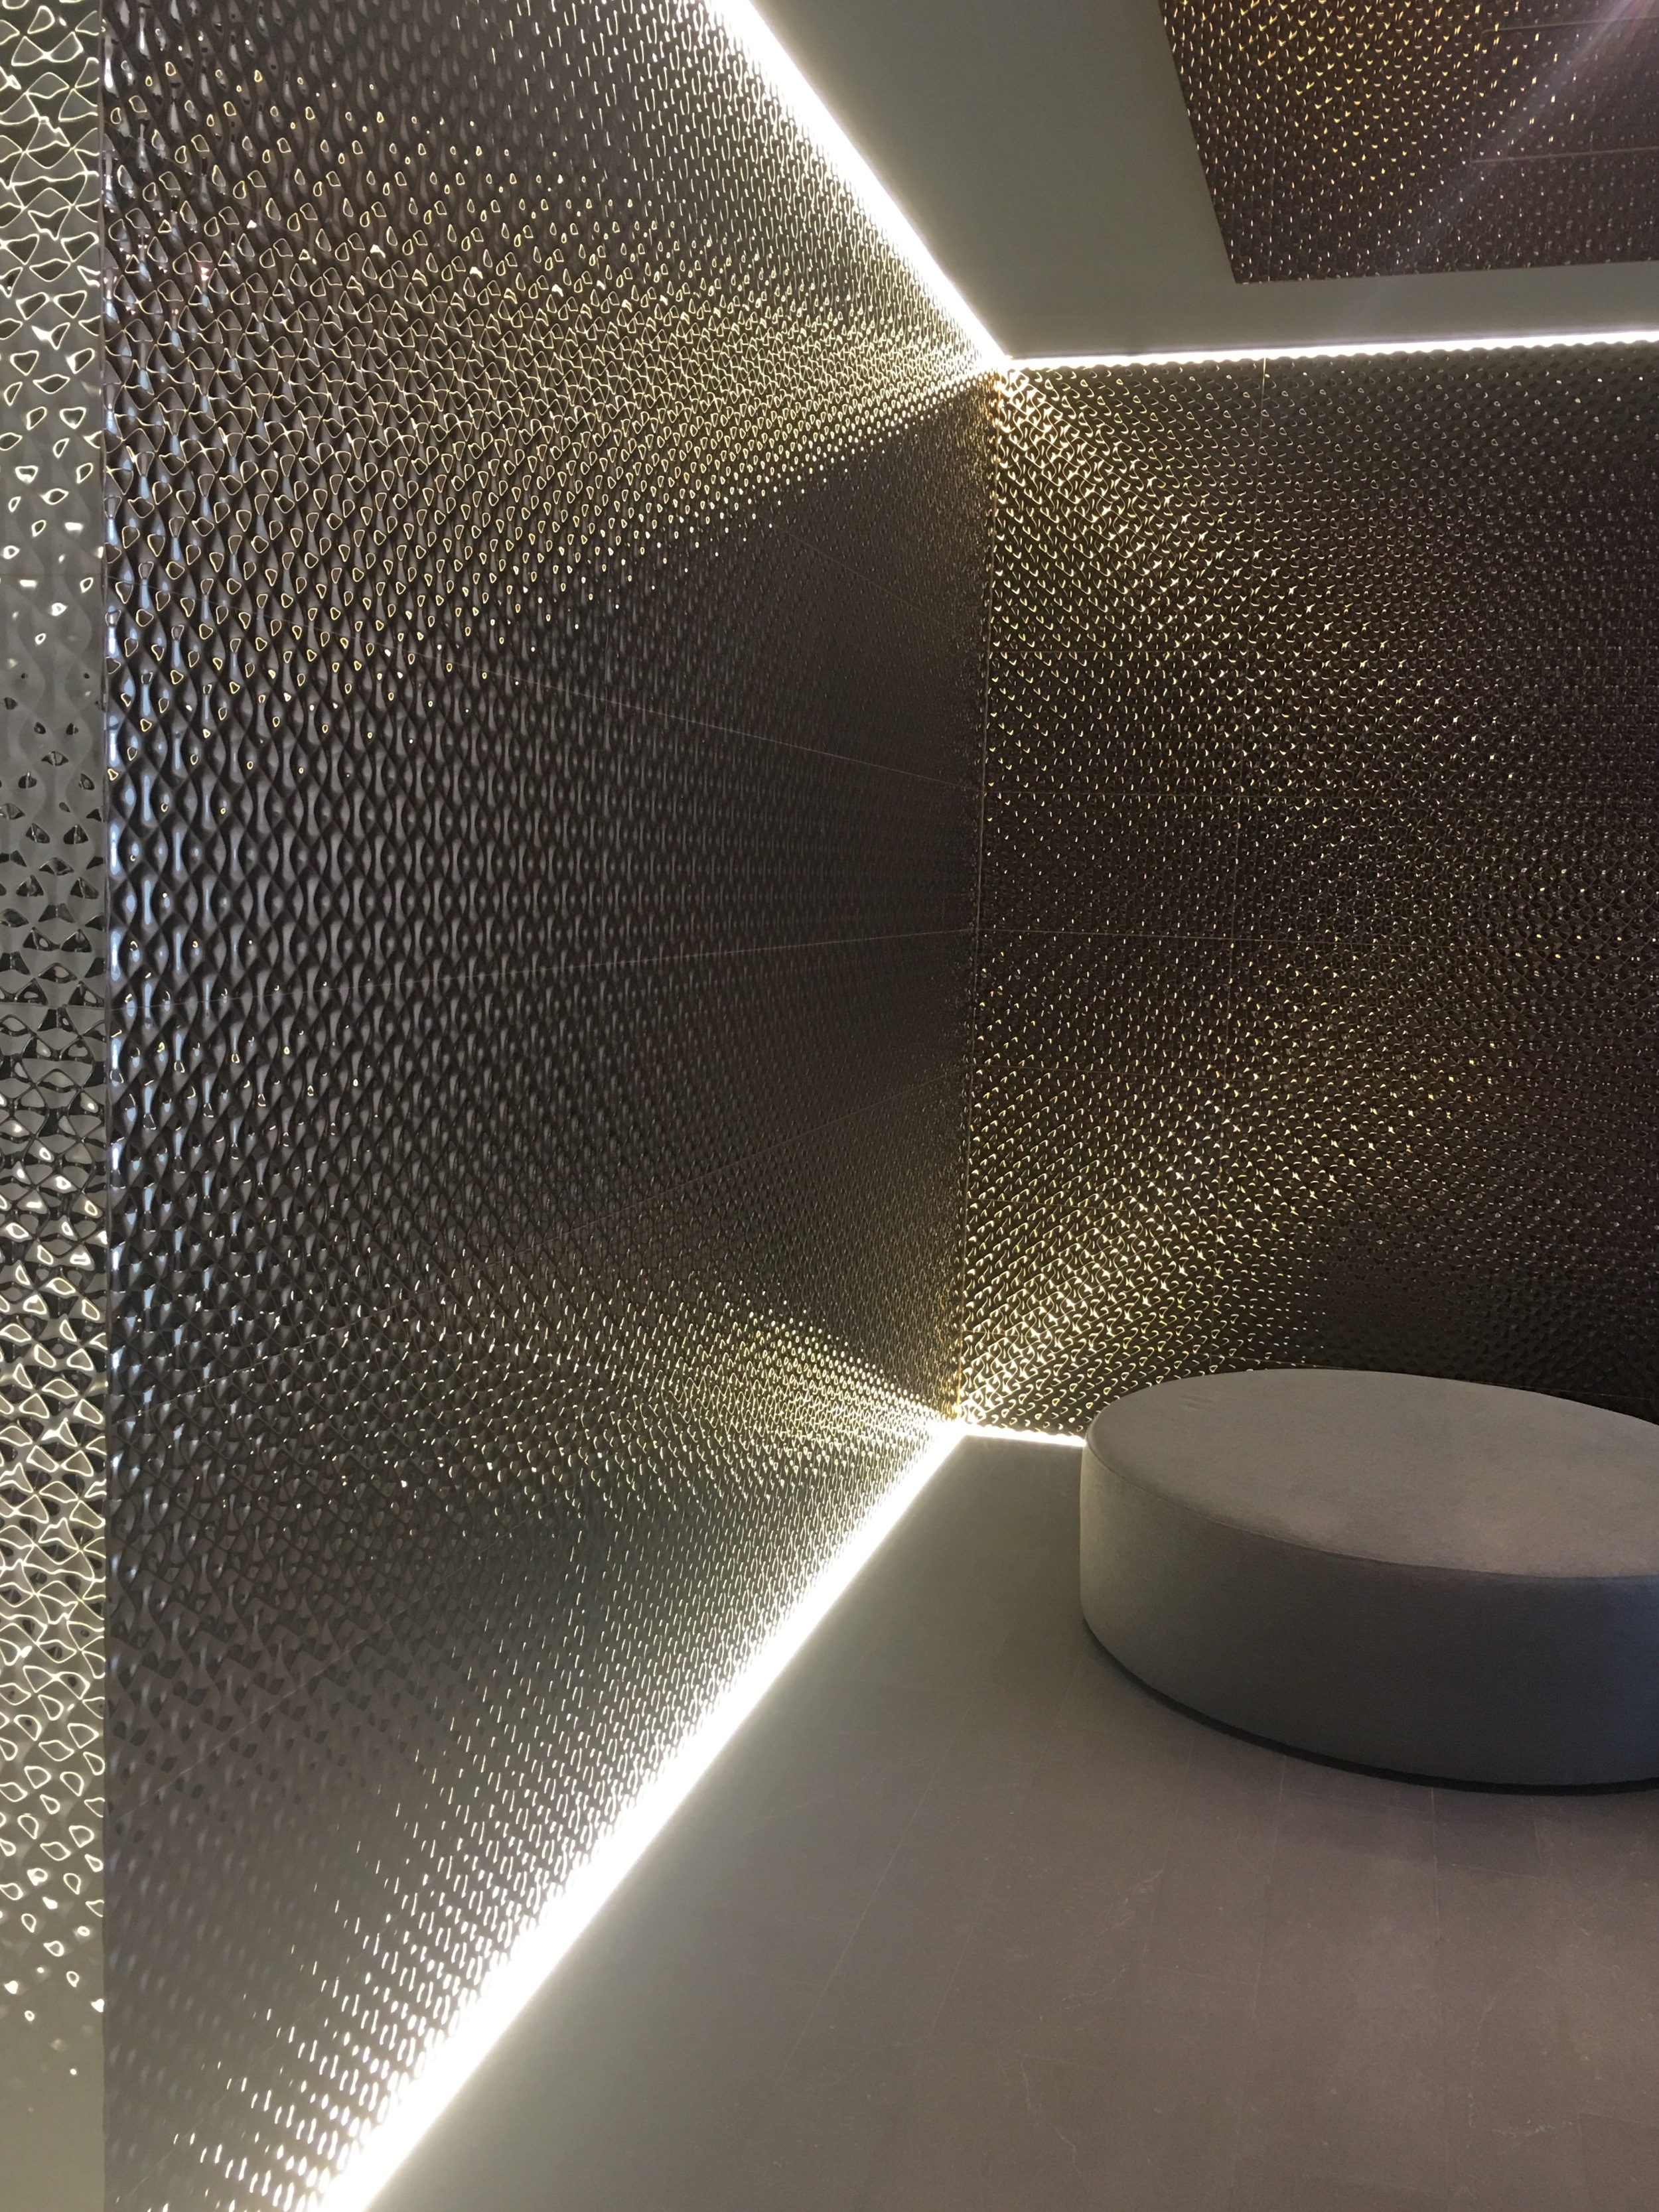 Striking geometric wall tile, with recessed lighting to highlight the design features